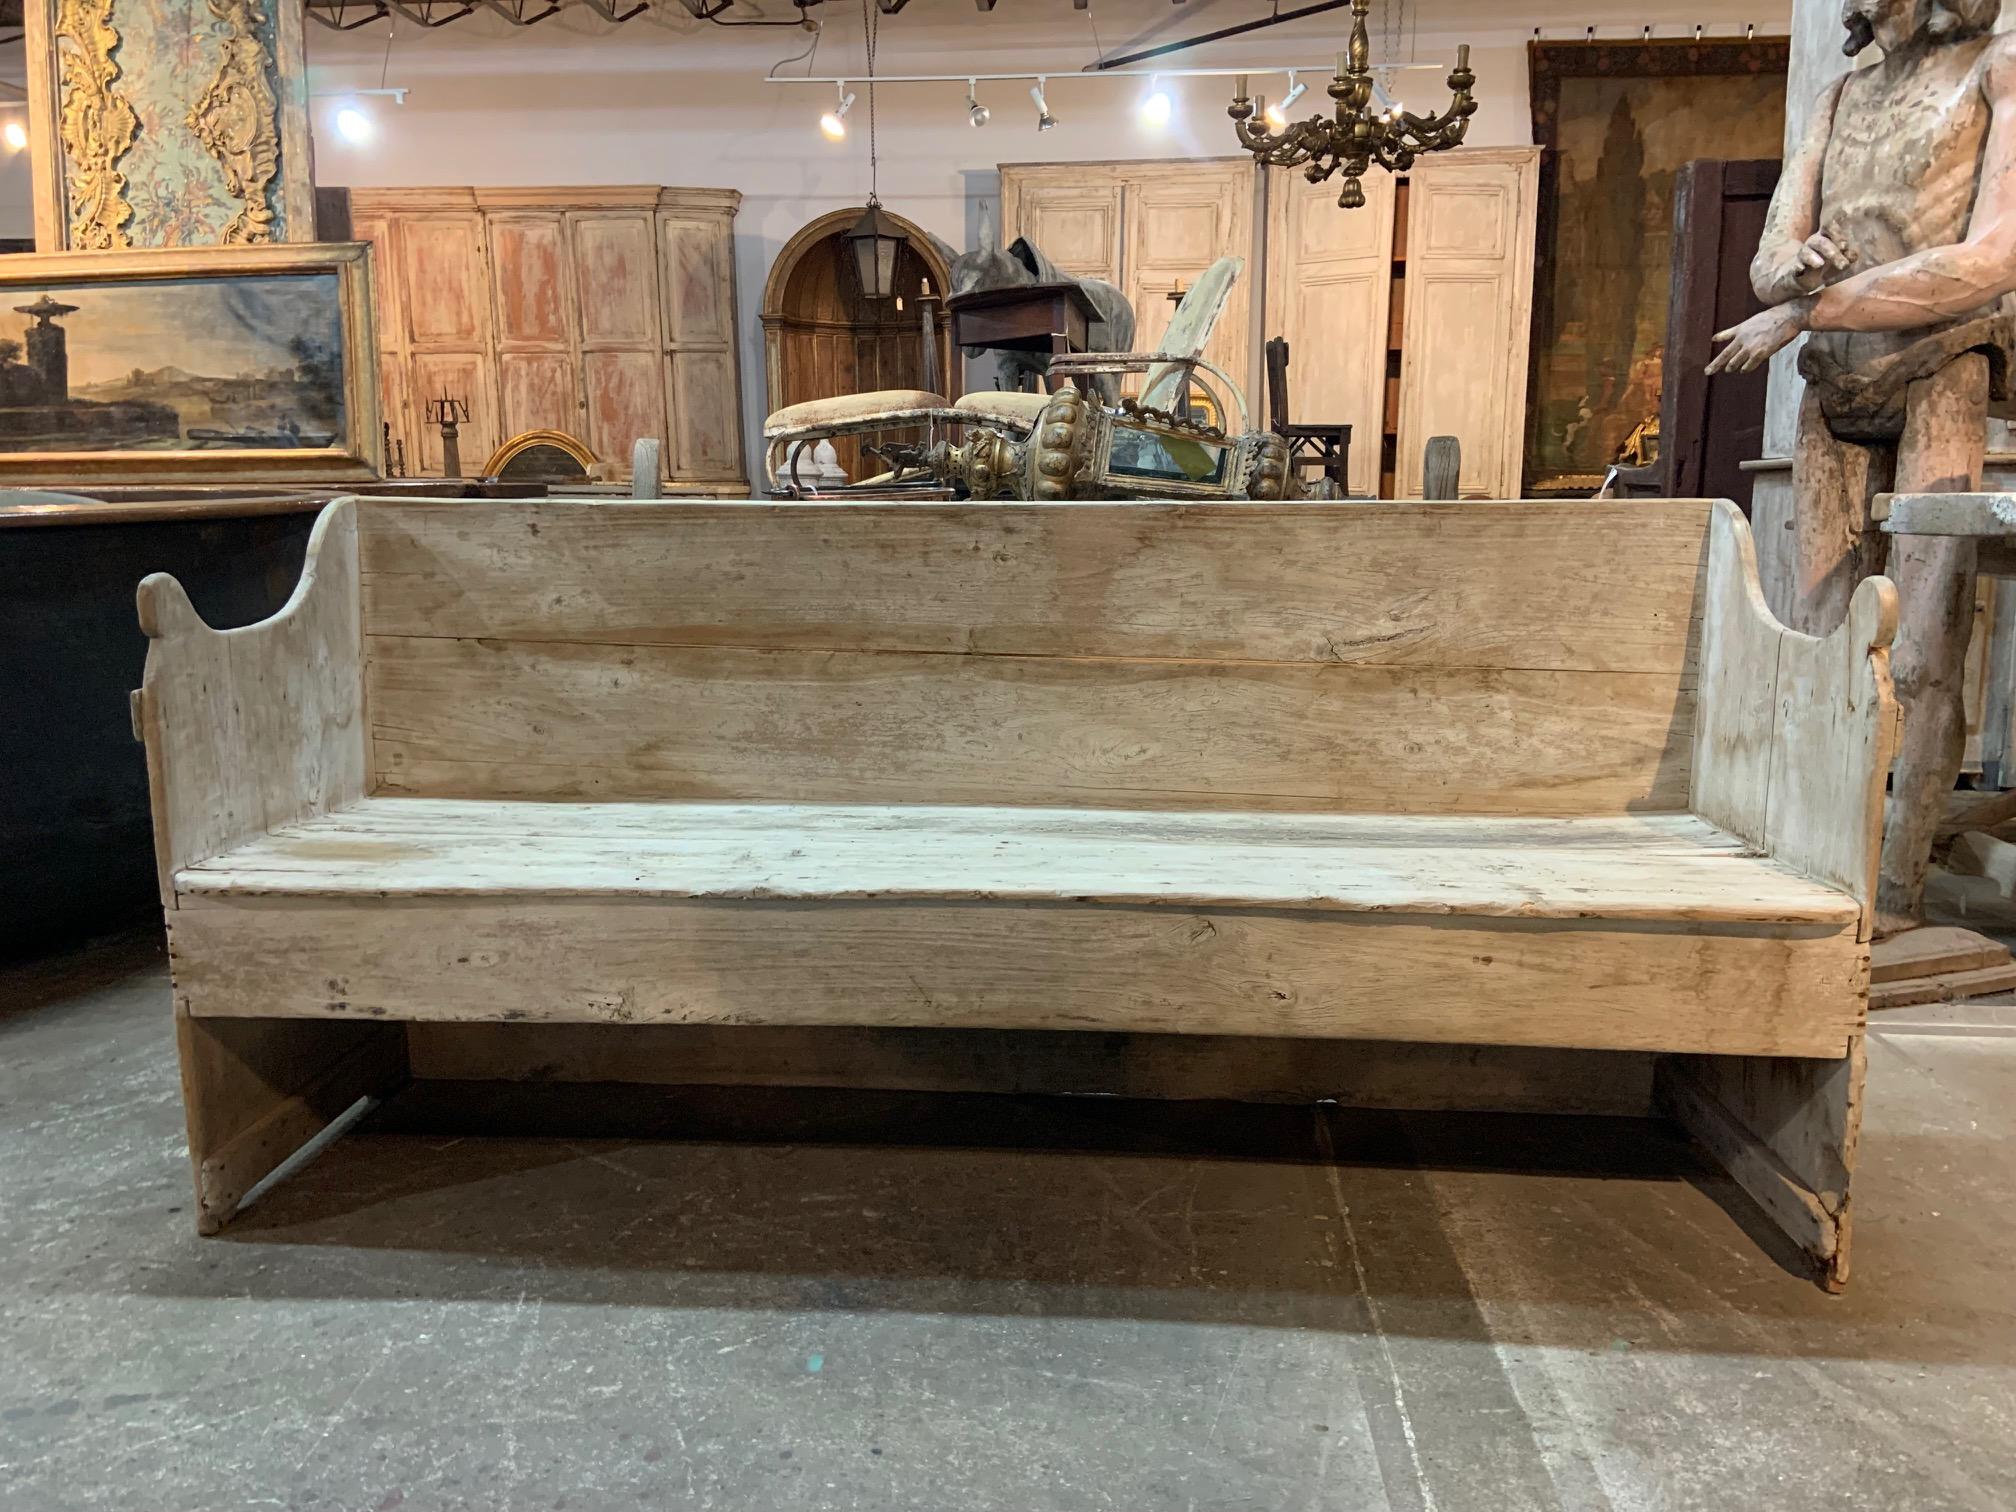 A very handsome 18th century bench from the Catalan region of Spain. Beautifully constructed from apple and poplar woods. Fabulous patina!